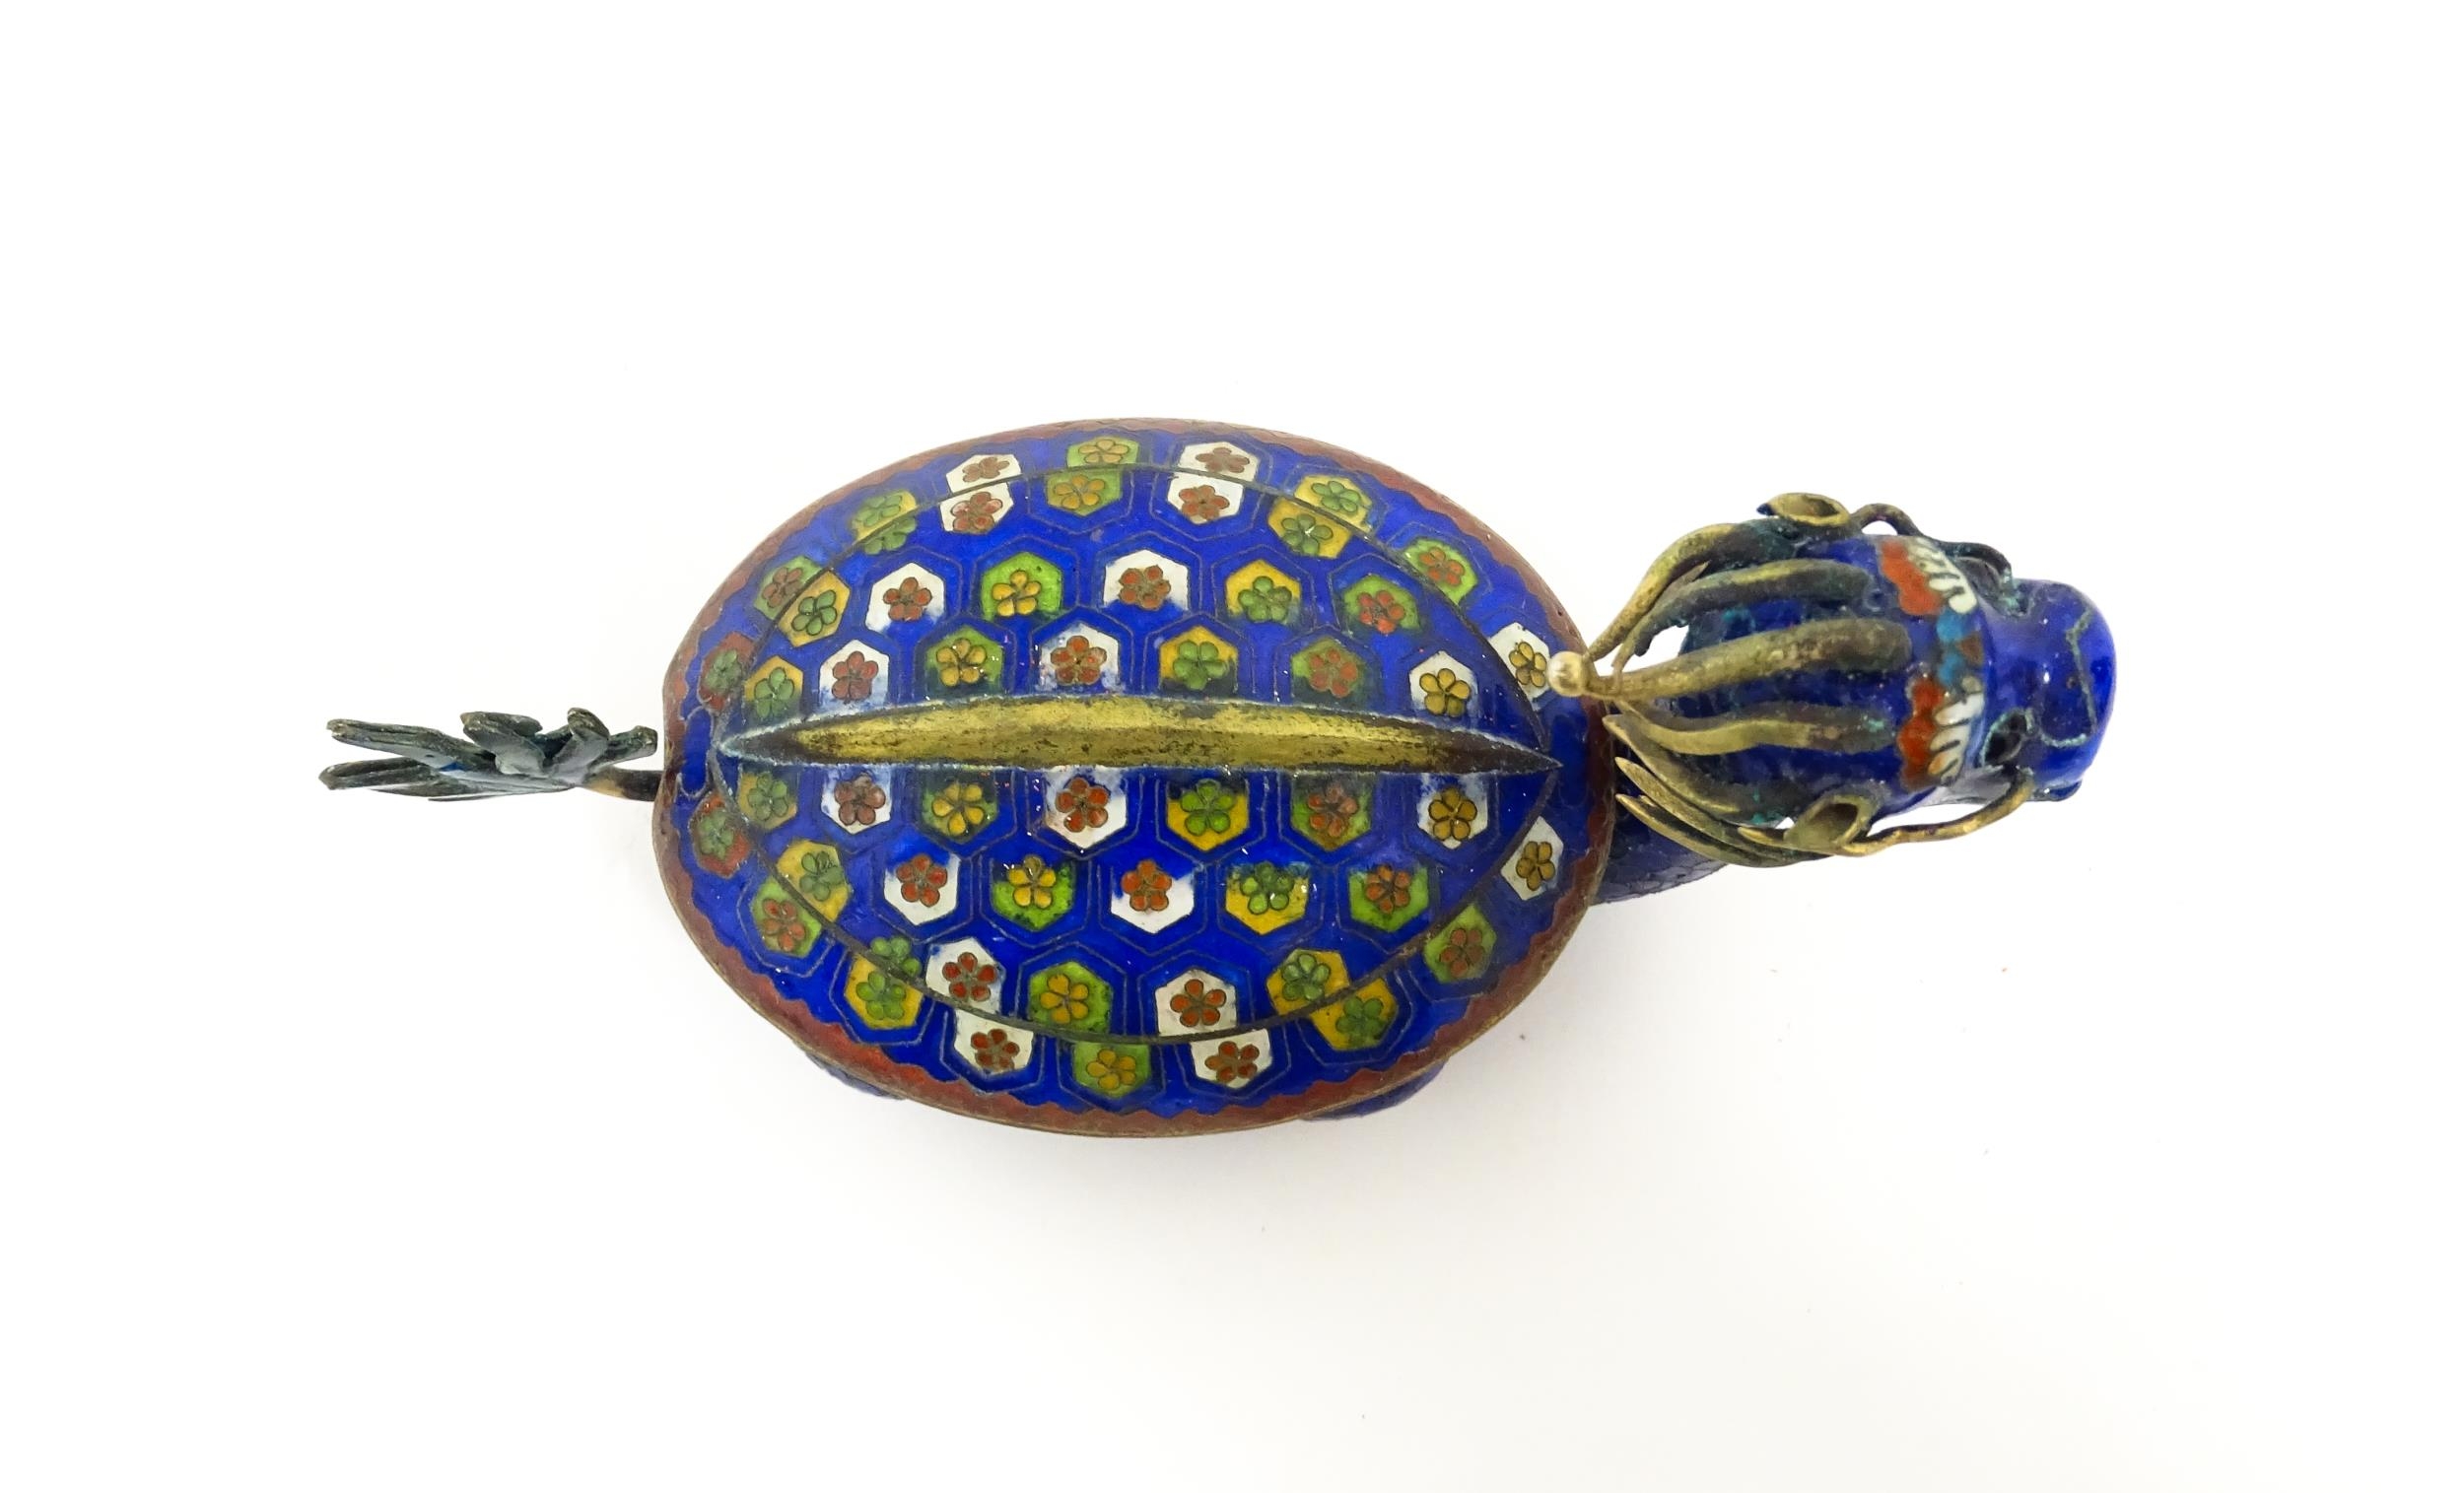 A Chinese cloisonne pot and cover modelled as a Dragon Turtle mythical creature. Approx. 5 1/4" long - Image 7 of 7